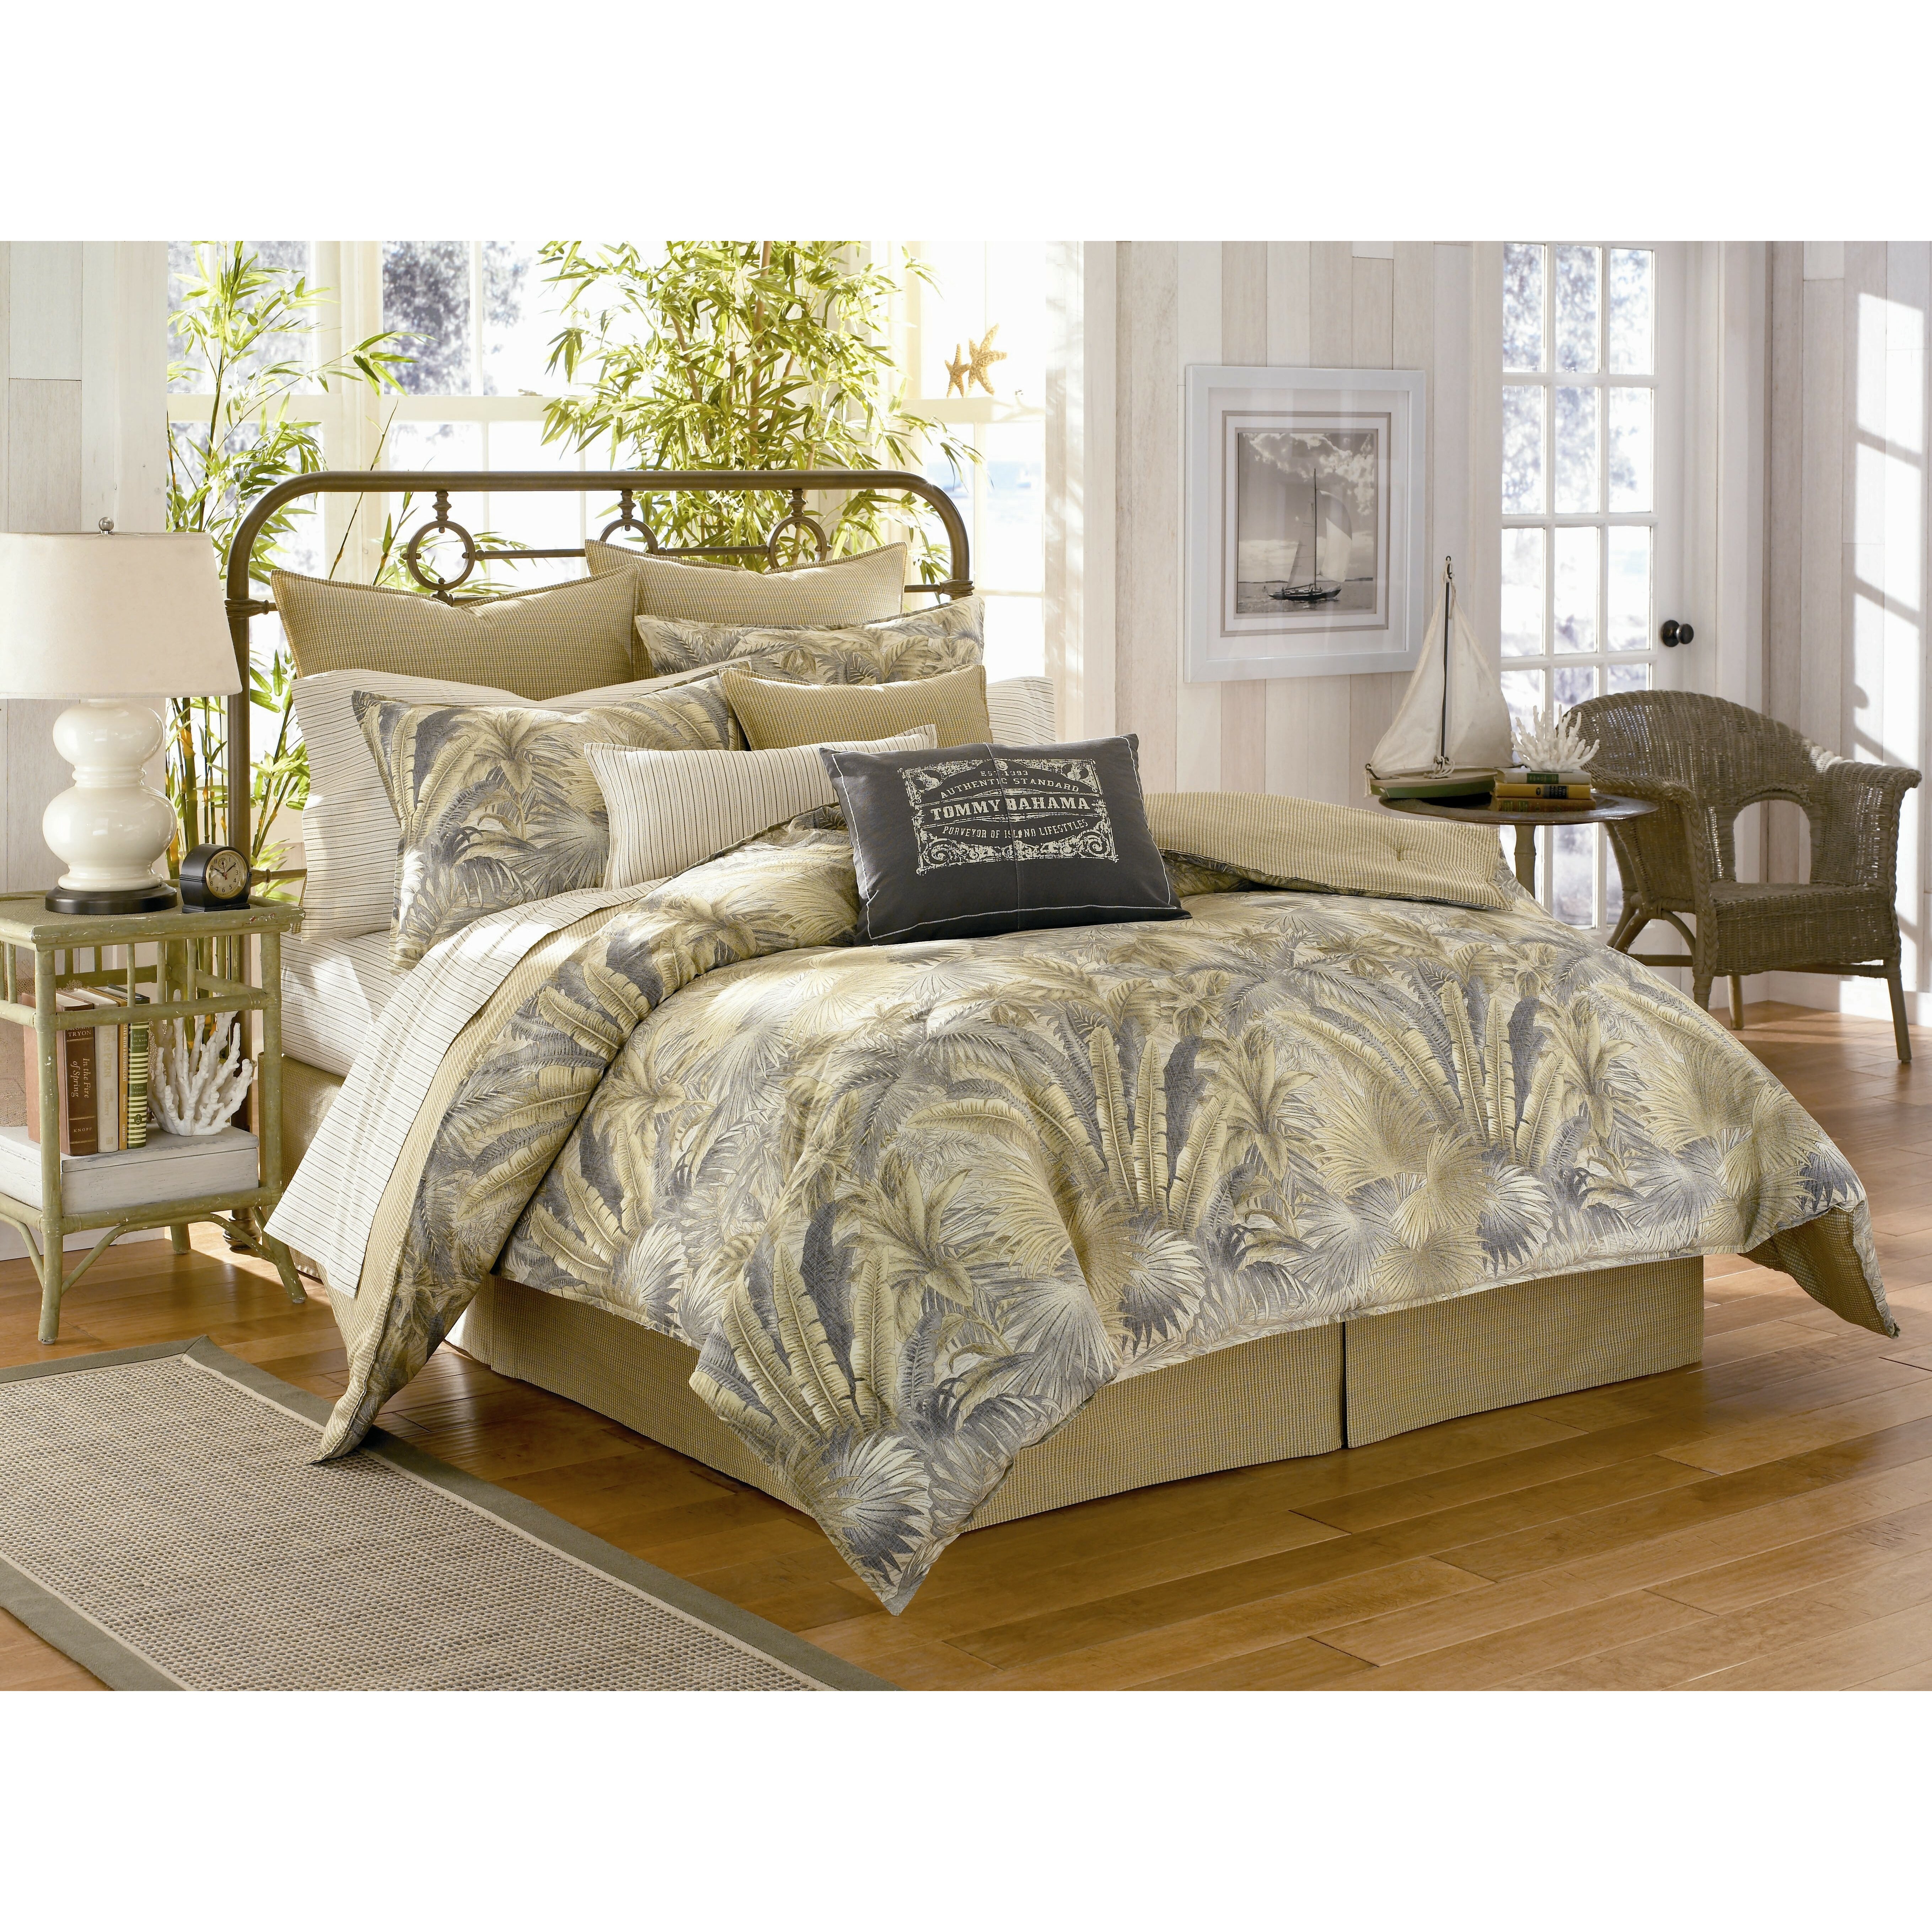 Tommy Bahama Bedding Bahamian Breeze Comforter Collection & Reviews